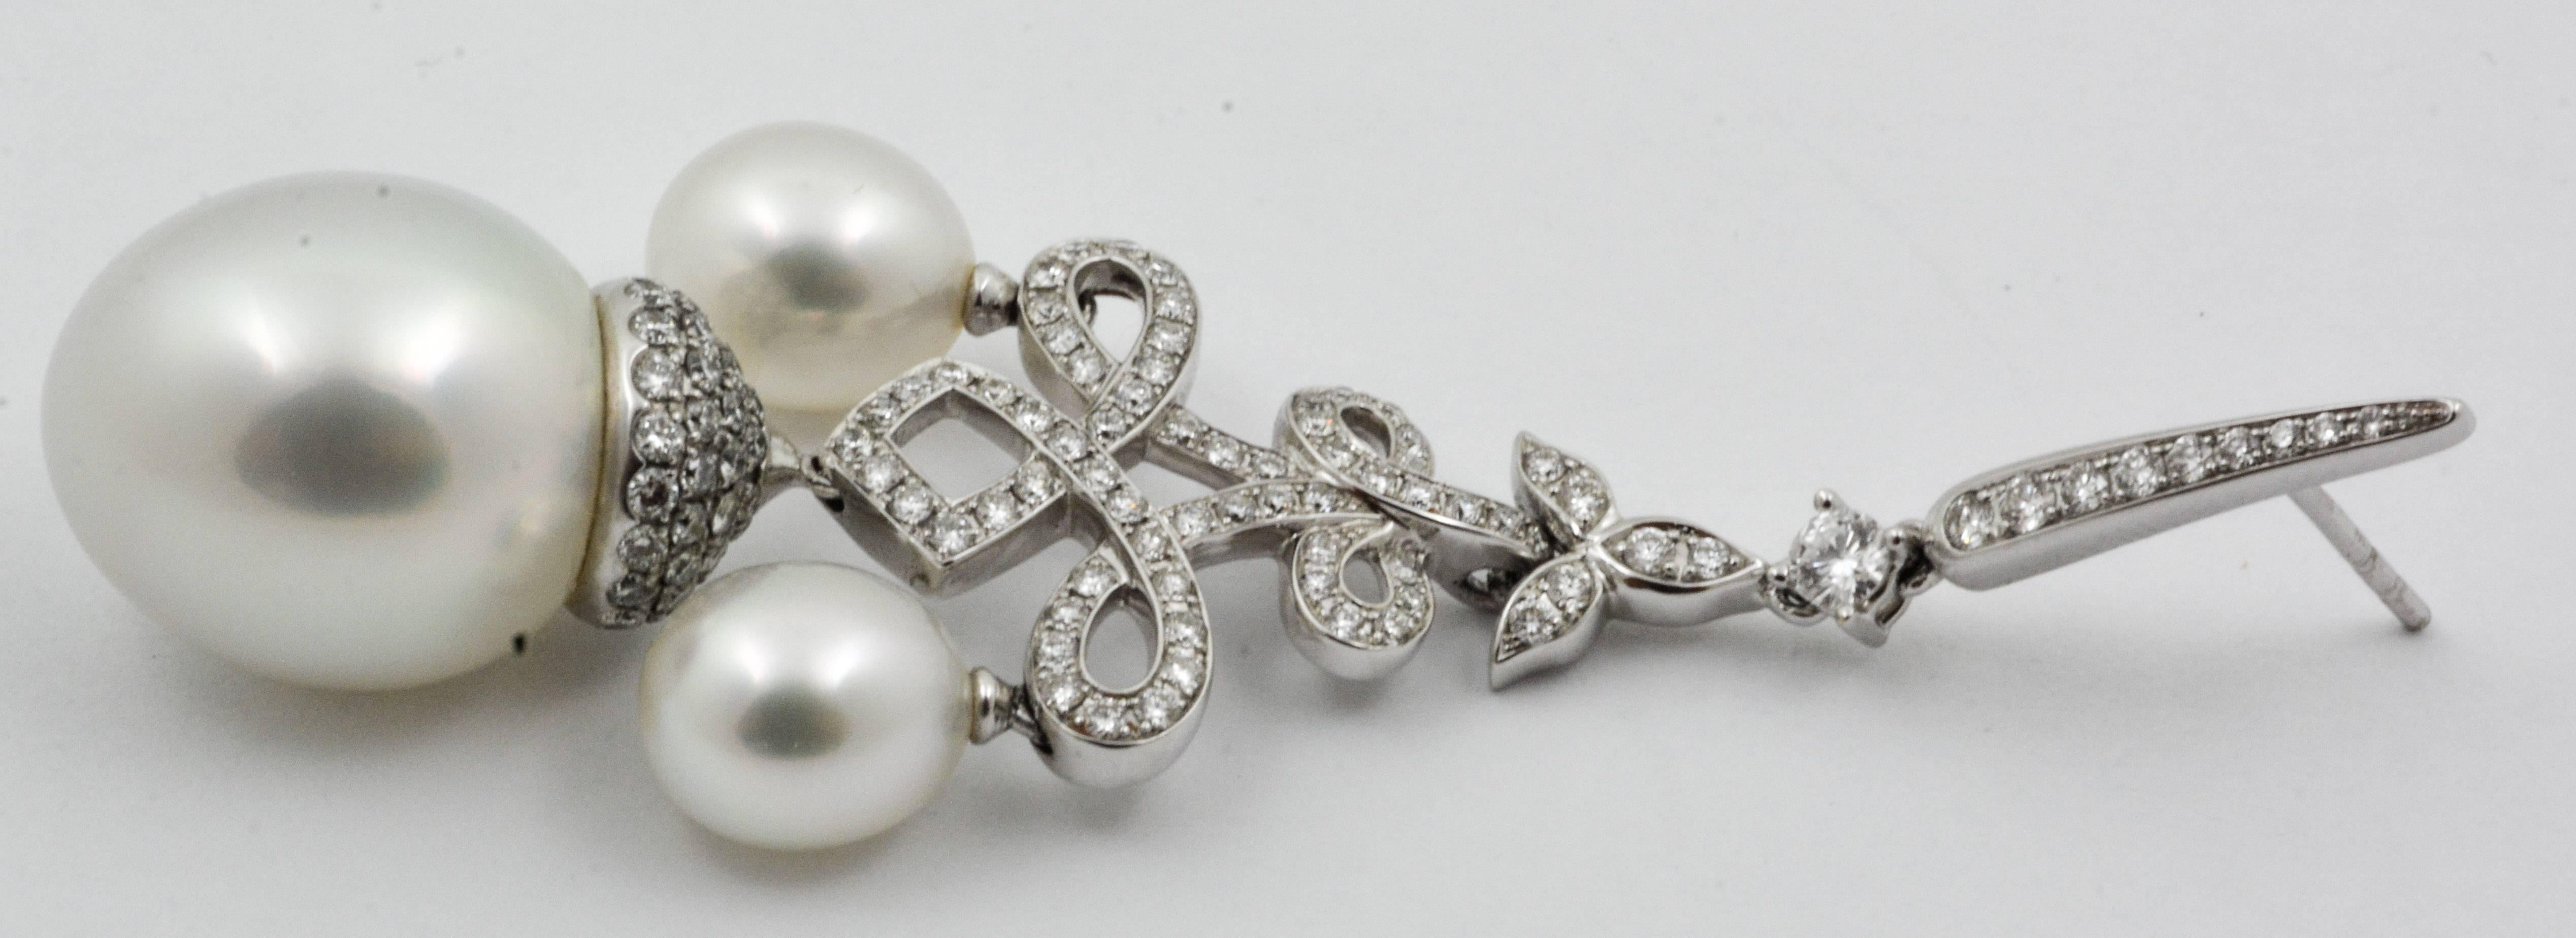 Diamonds and pearls hanging on chandelier style earrings are irresistible to any lady! These classic chandelier style South Seas pearl earrings are crafted with 18kt white gold and feature three lovely, white South Sea pearls each. The center pearls